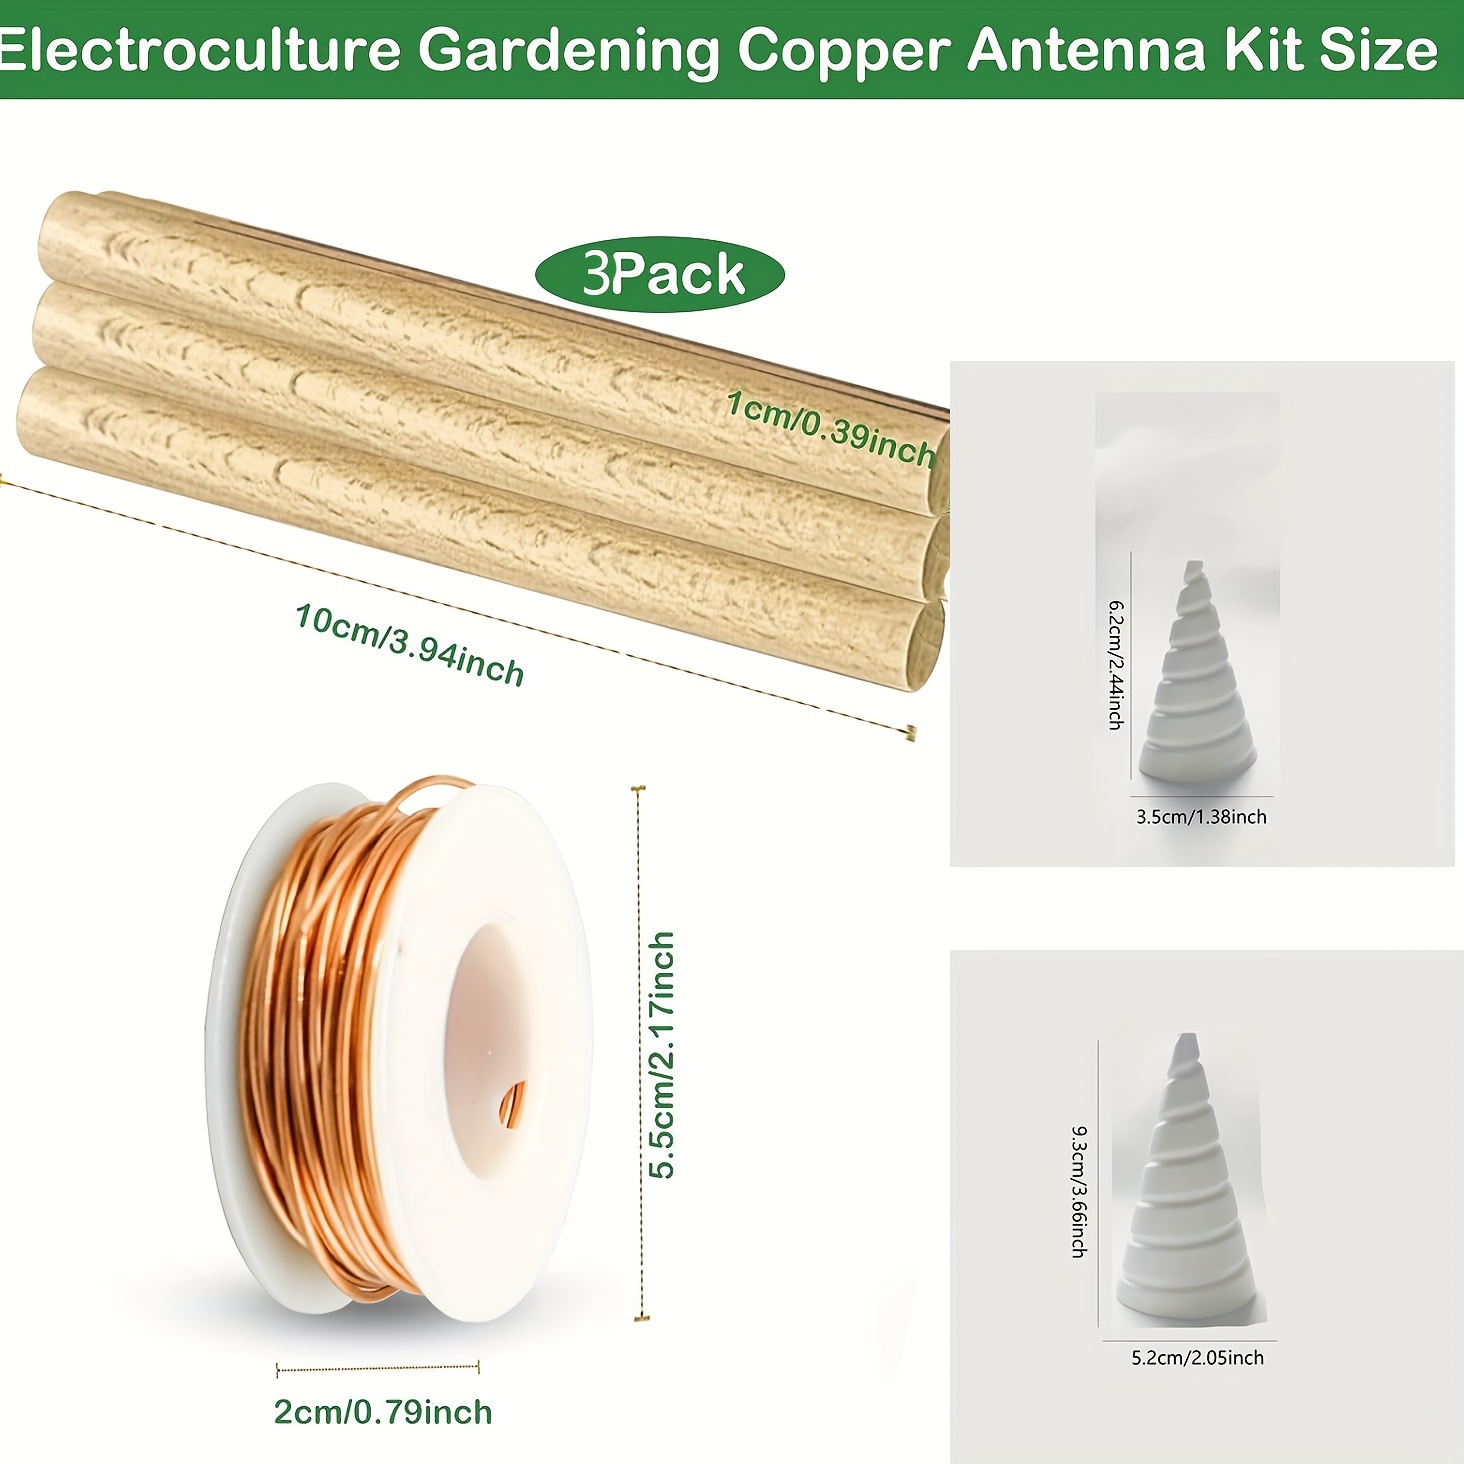 7 Pack Electroculture Plant Stakes - Electroculture Gardening Copper Coil  Antennas with 12 Long Solid Copper Stake, Electro Culture Gardening Copper  Stakes for Growing Garden Plants and Vegetables : : Garden